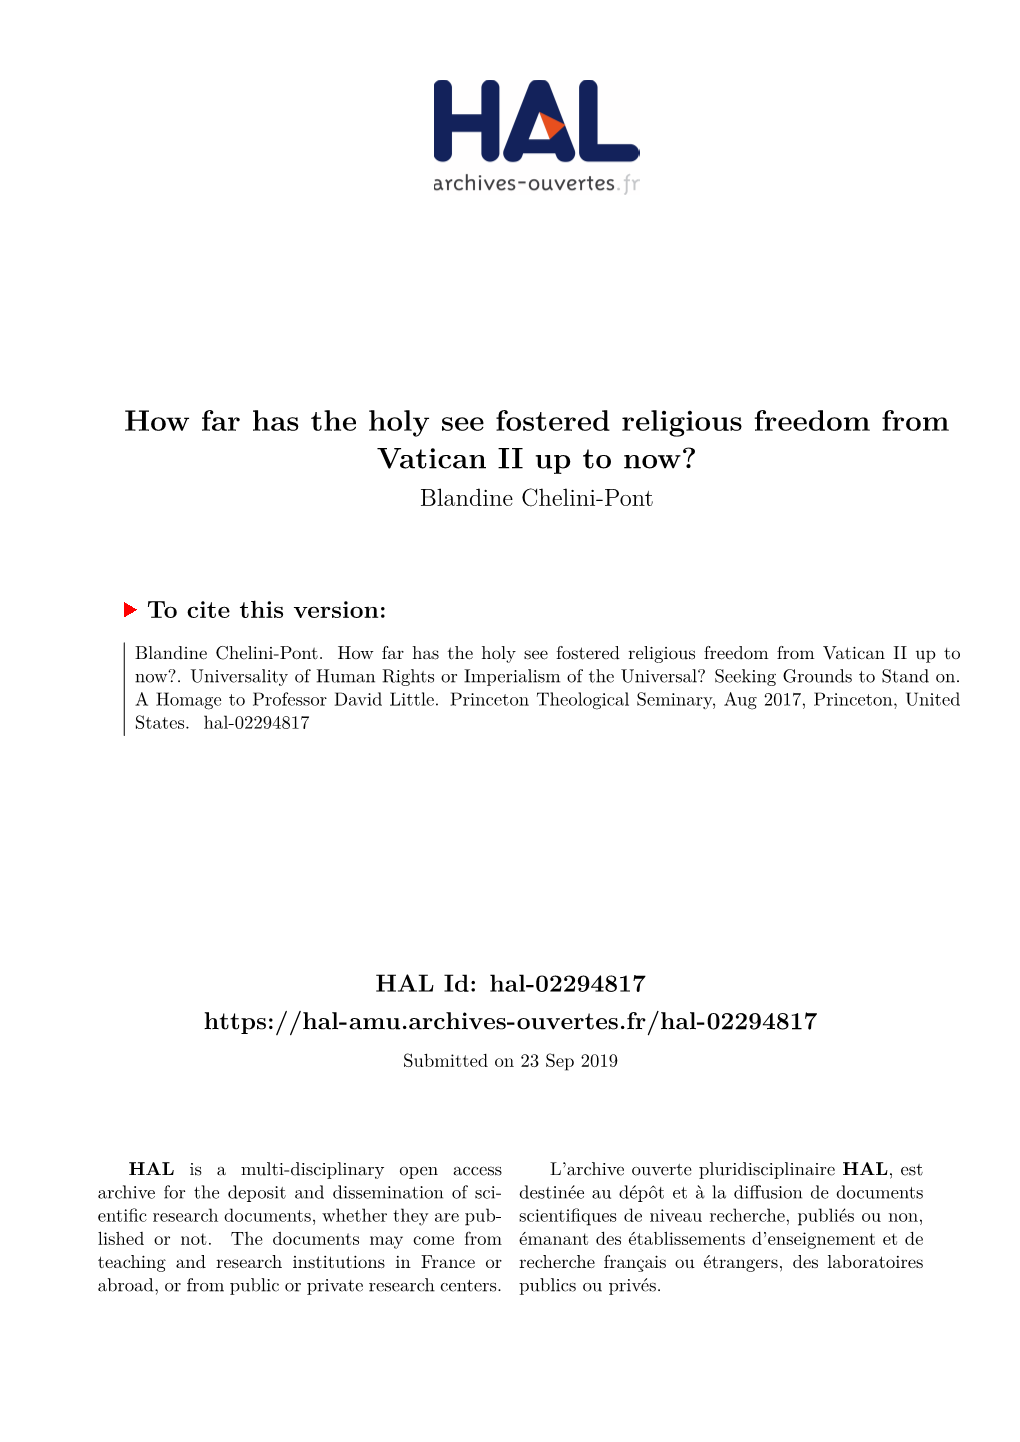 How Far Has the Holy See Fostered Religious Freedom from Vatican II up to Now? Blandine Chelini-Pont